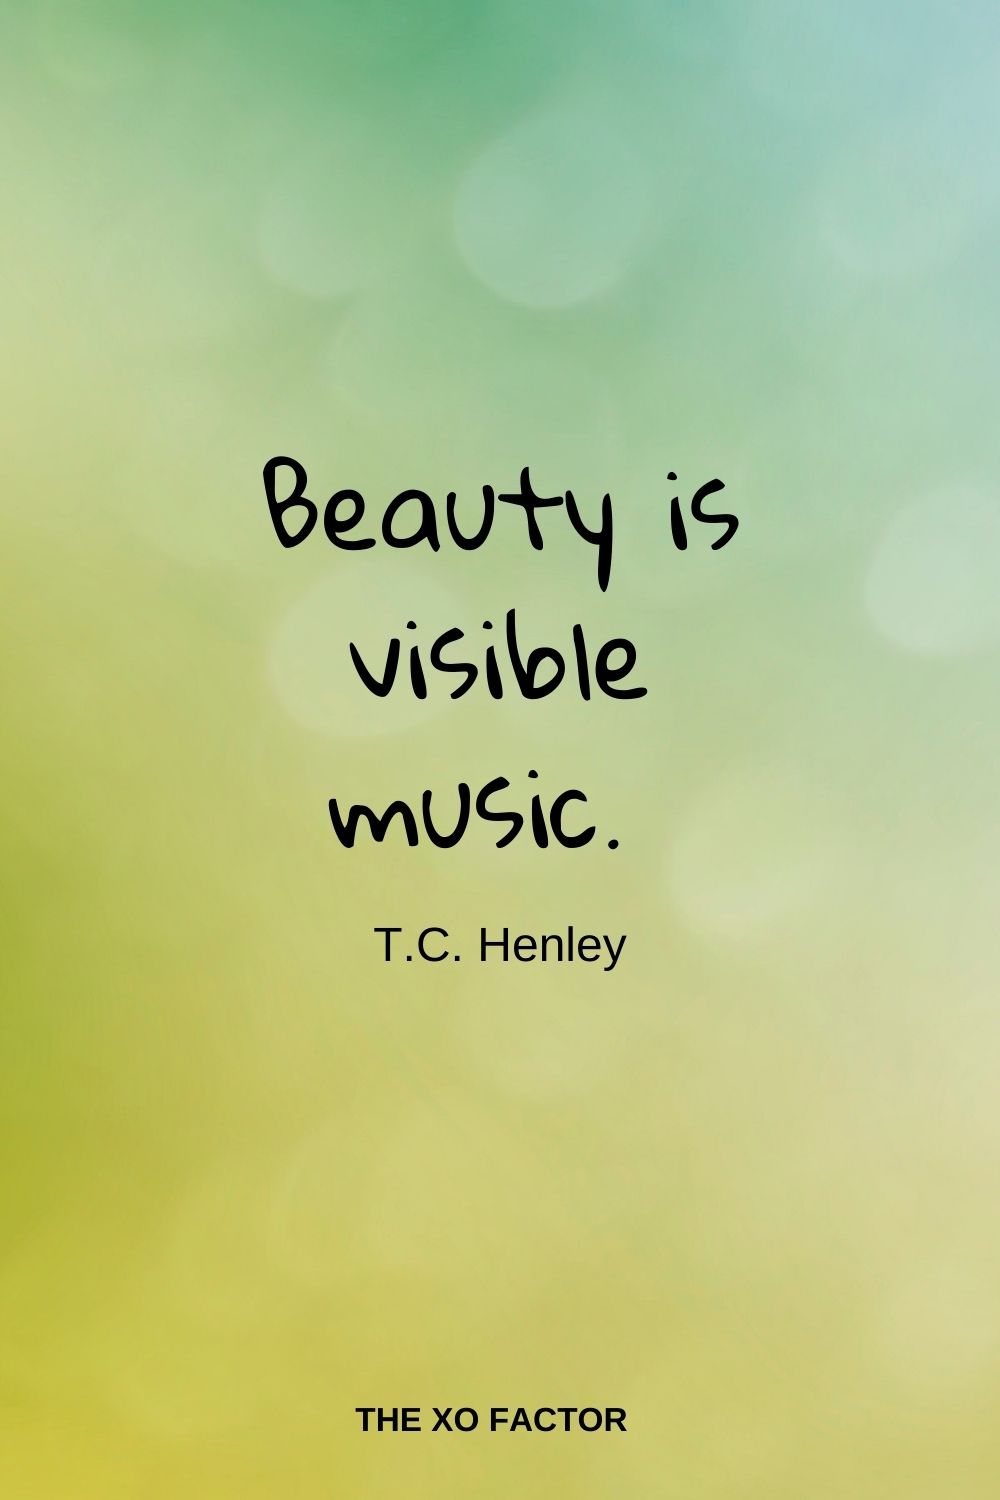 Beauty is visible music.  T.C. Henley